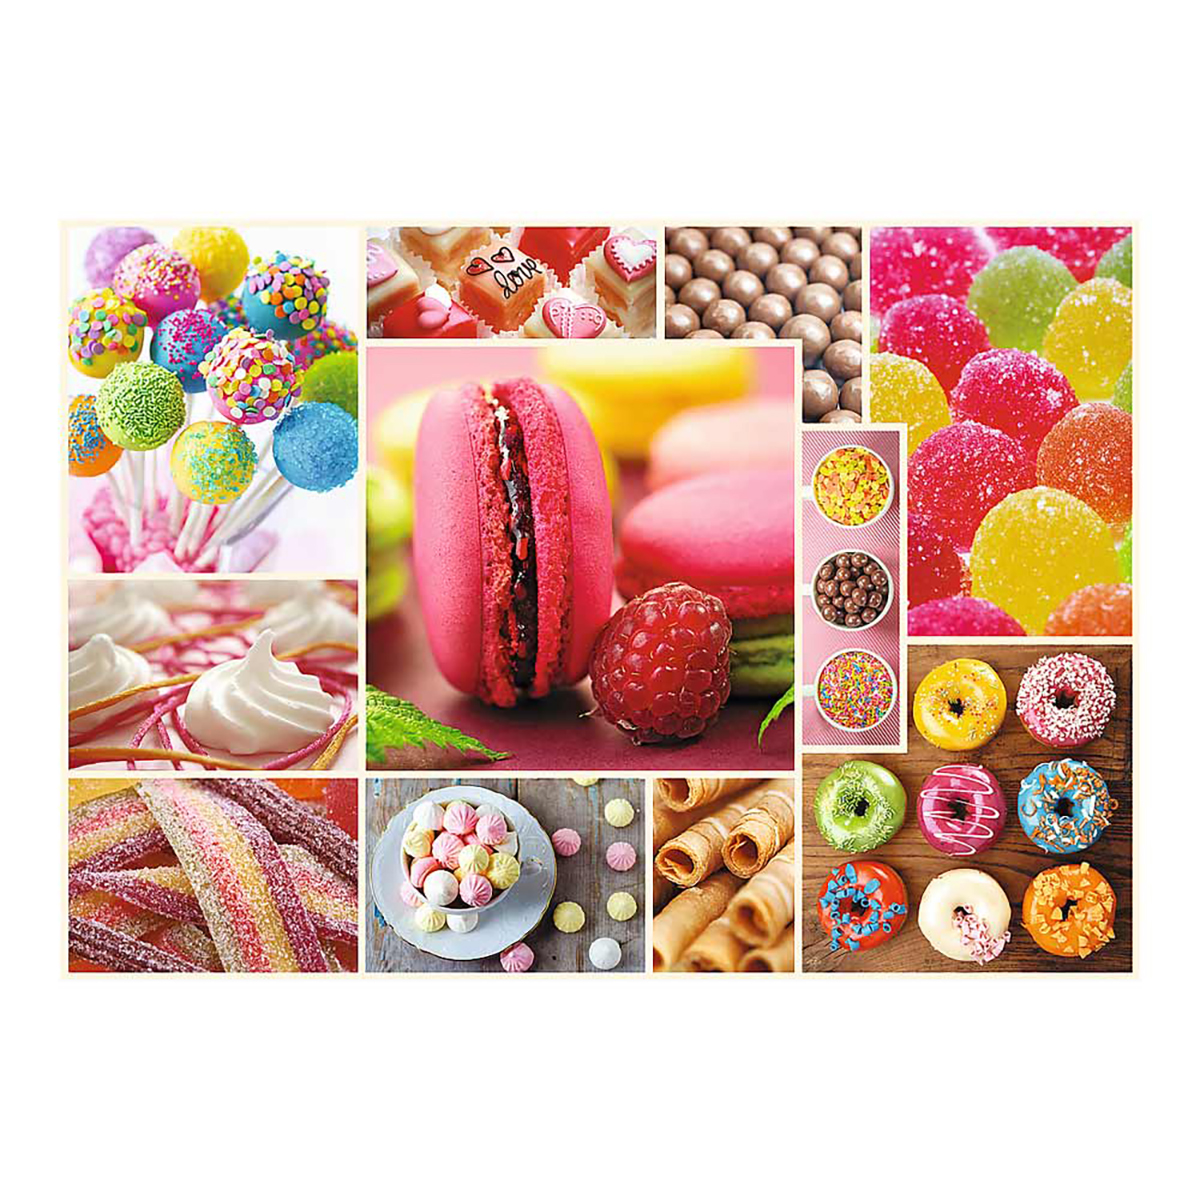 TREFL Candy - Collage Puzzle